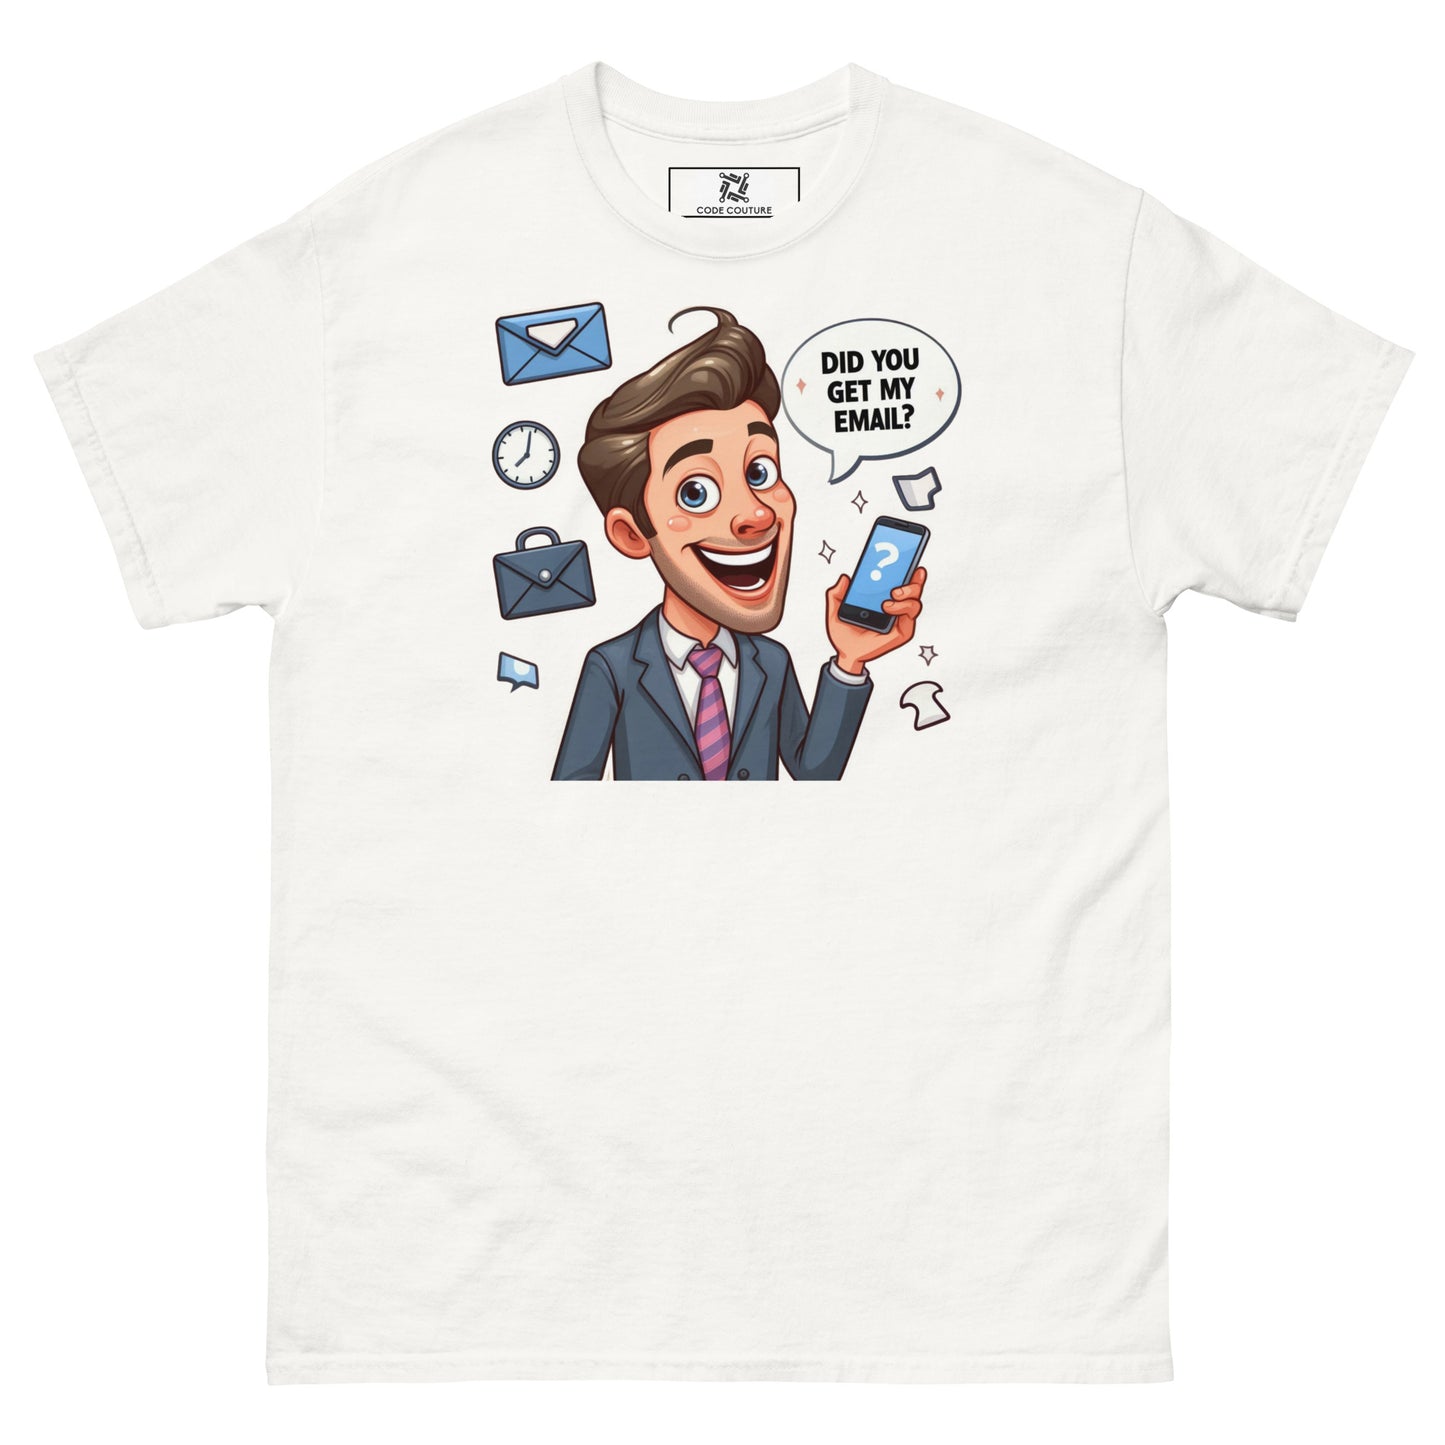 Get My Email tee?